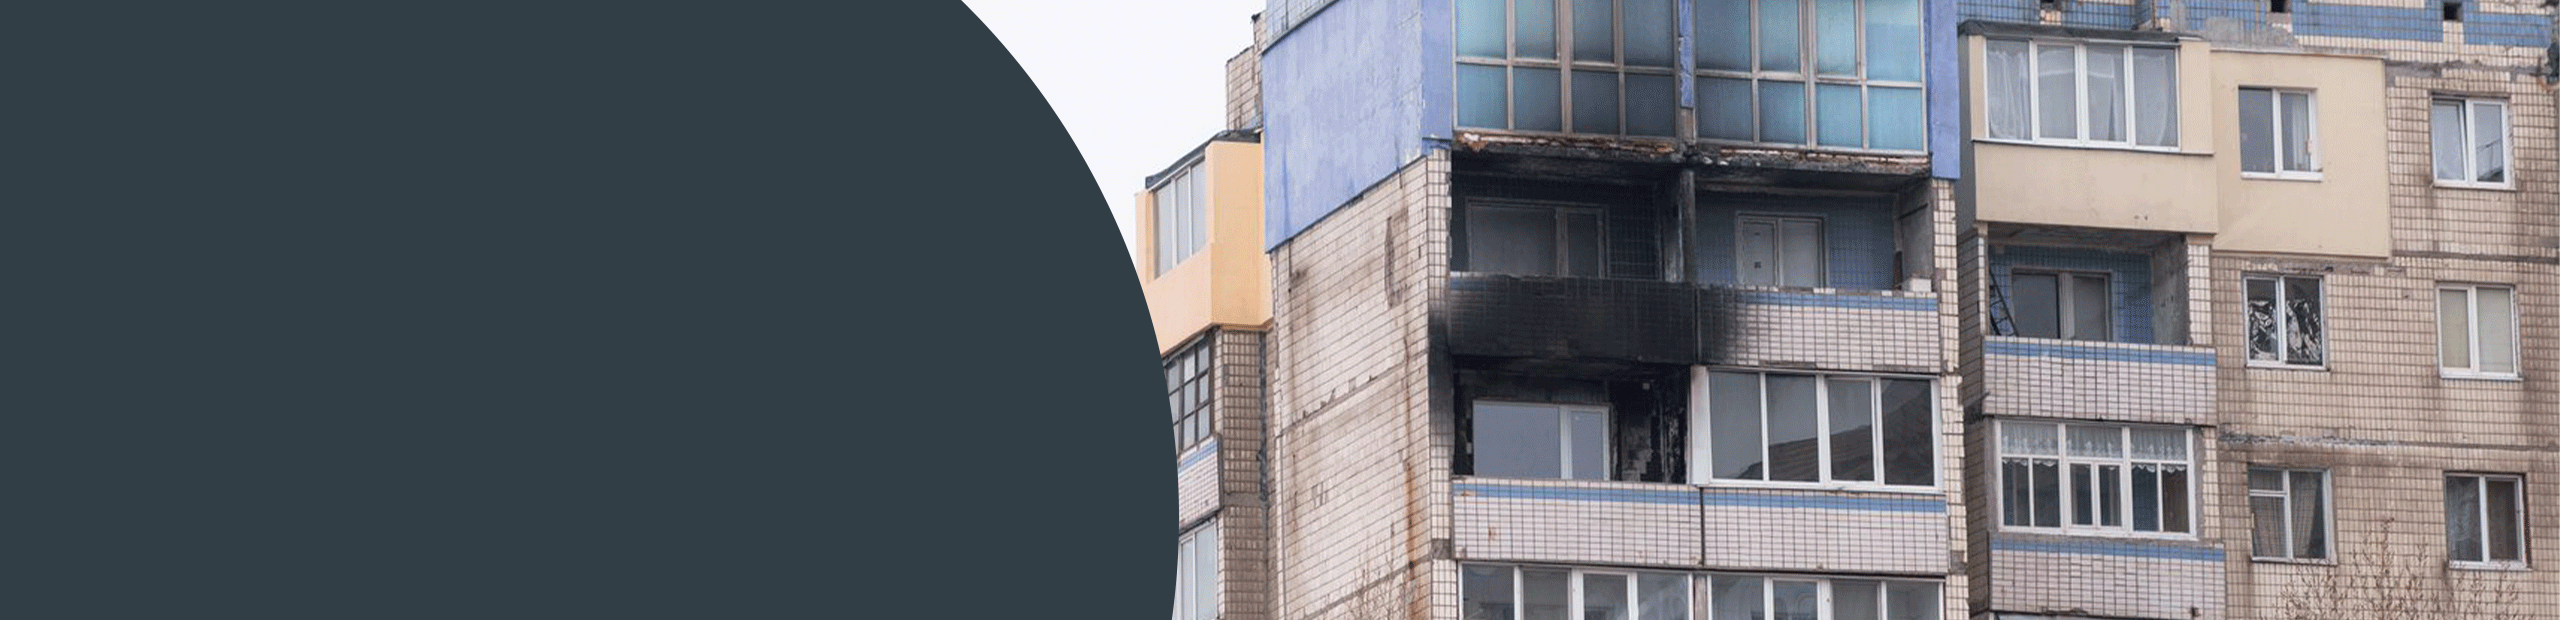 Fire Damage Cleaning - Leeds 